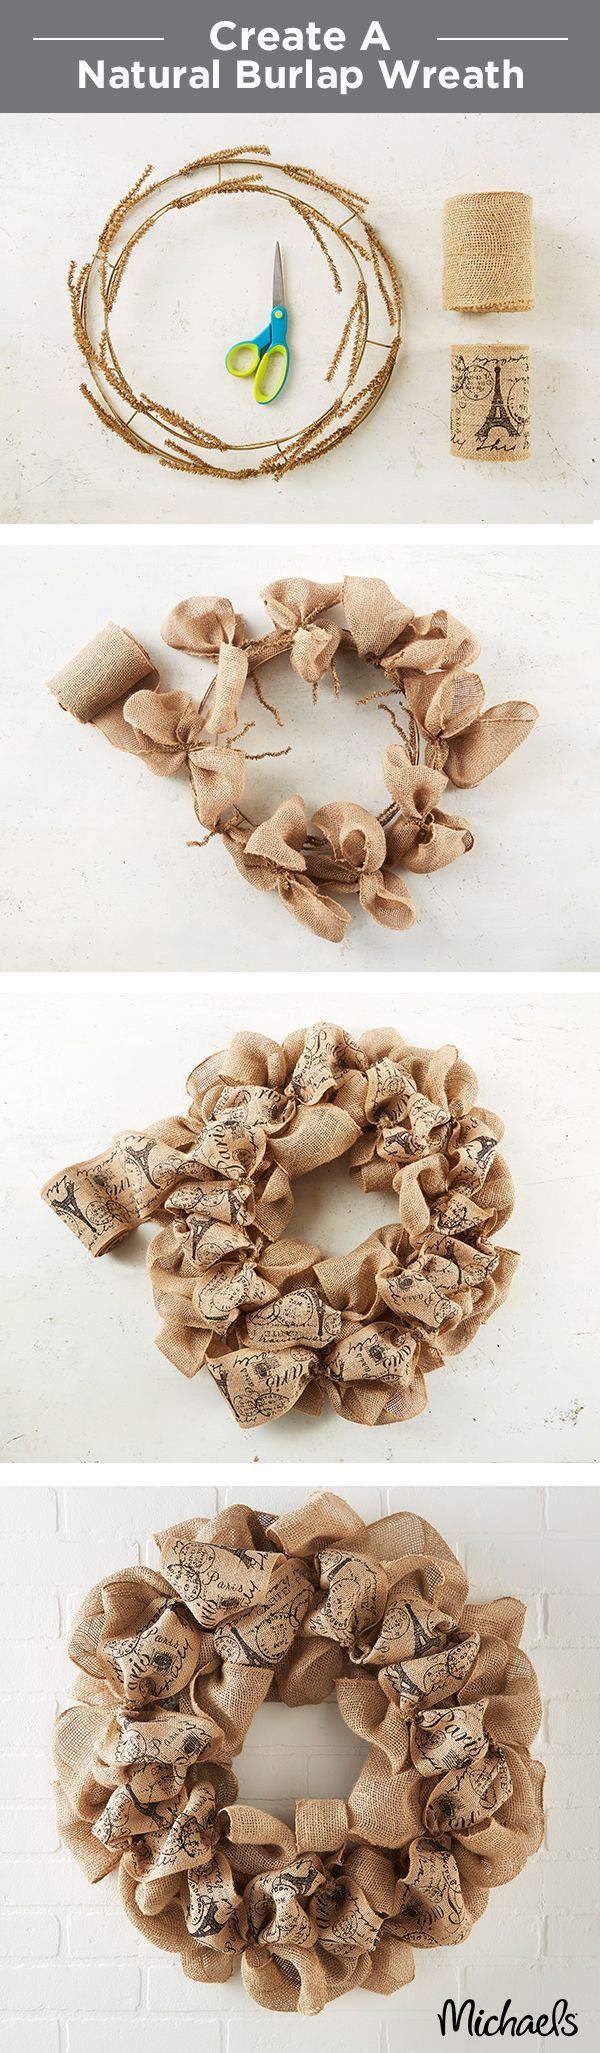 A simple burlap wreath is the perfect door décor. Tie burlap bows onto the wreath form using the attached wire stems. Layer on a